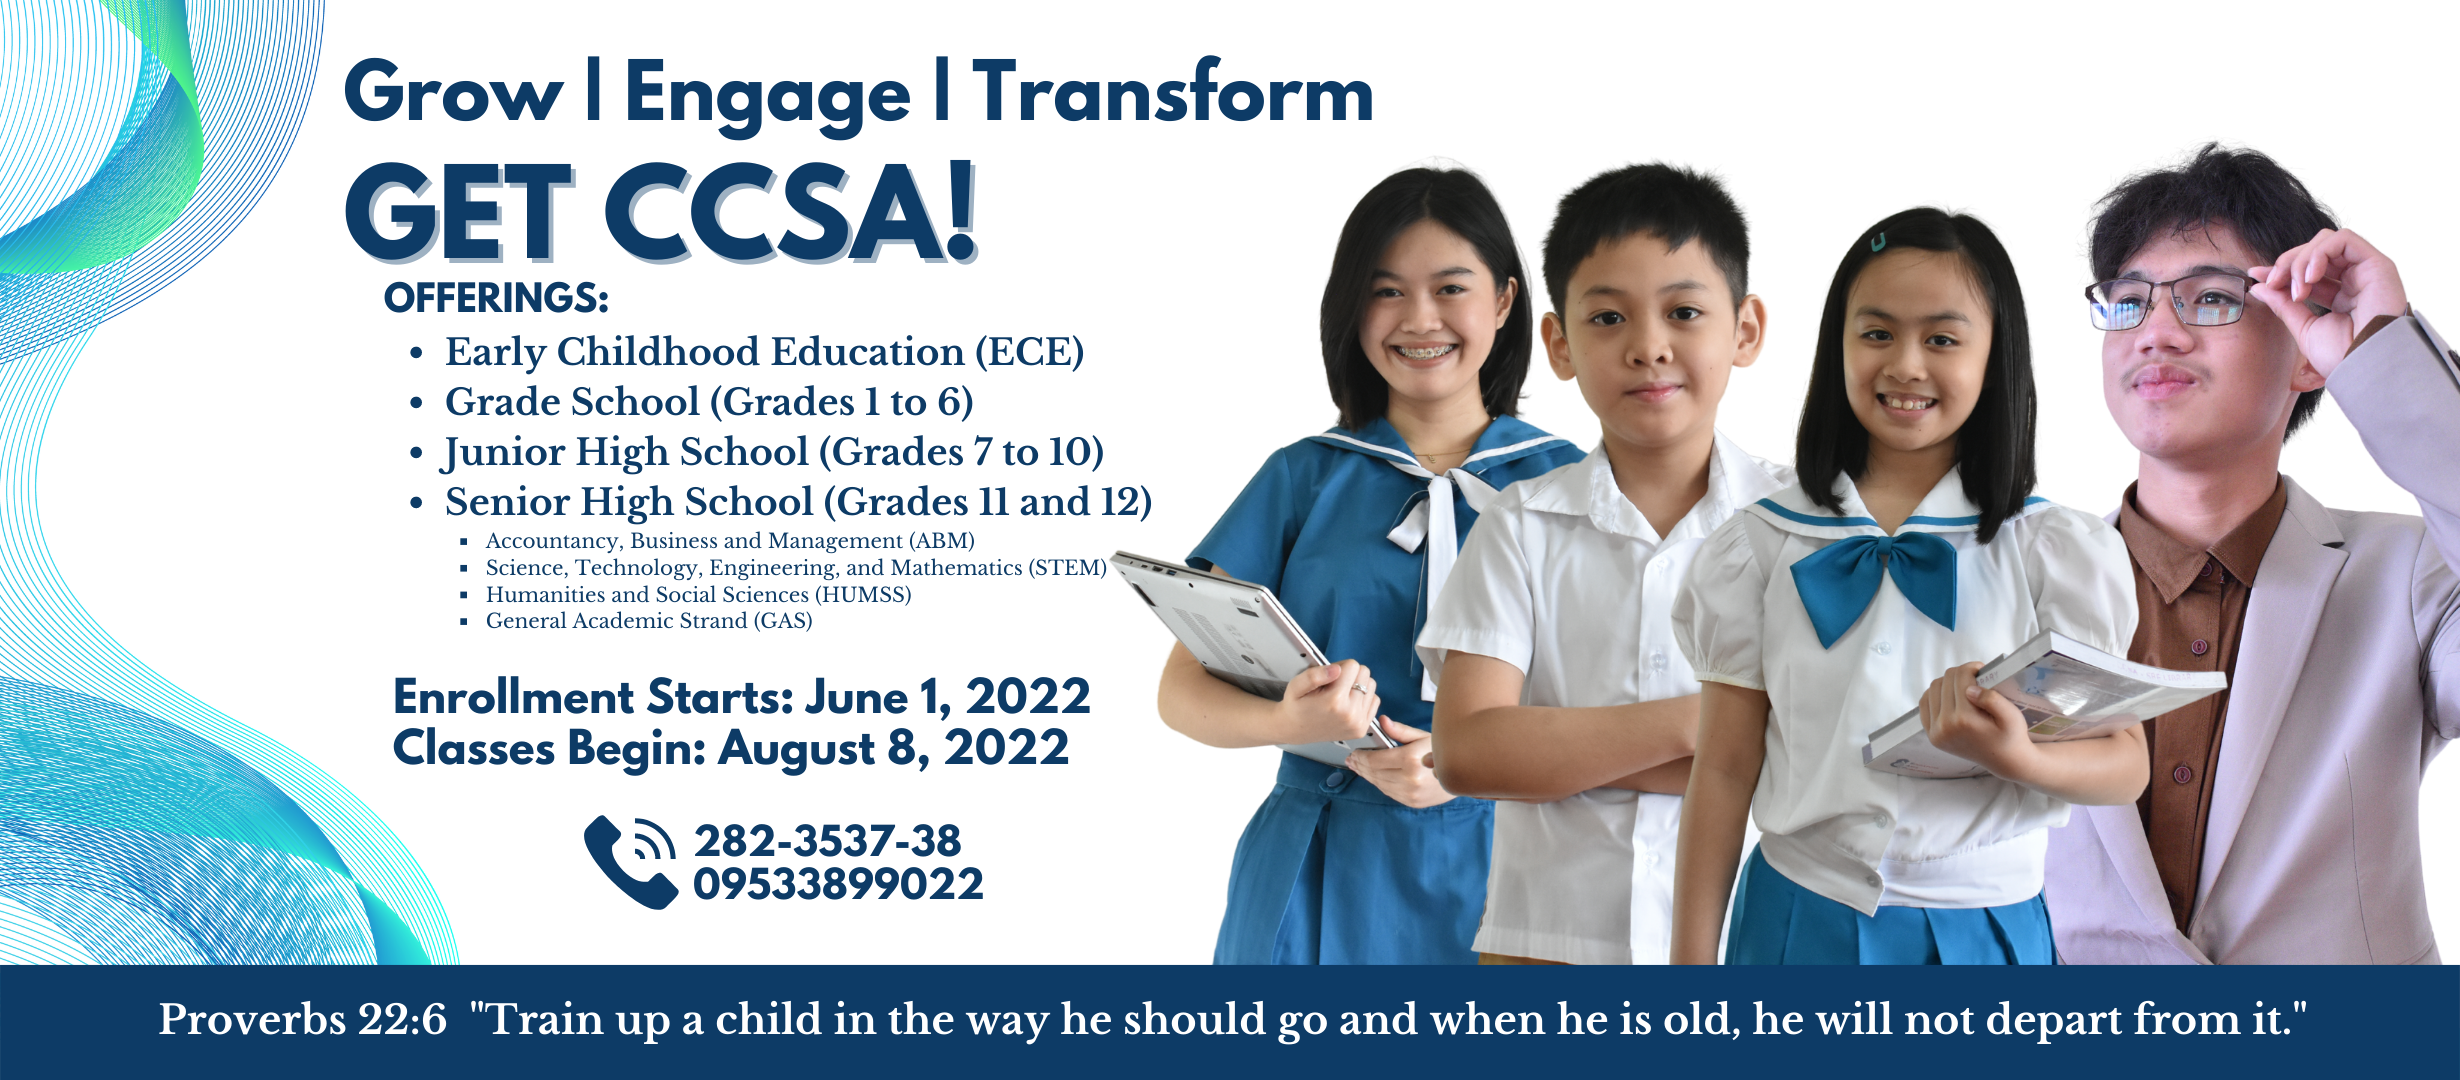 CHRISTIAN COLLEGES OF SOUTHEAST ASIA - SCHOOL OF BASIC EDUCATION